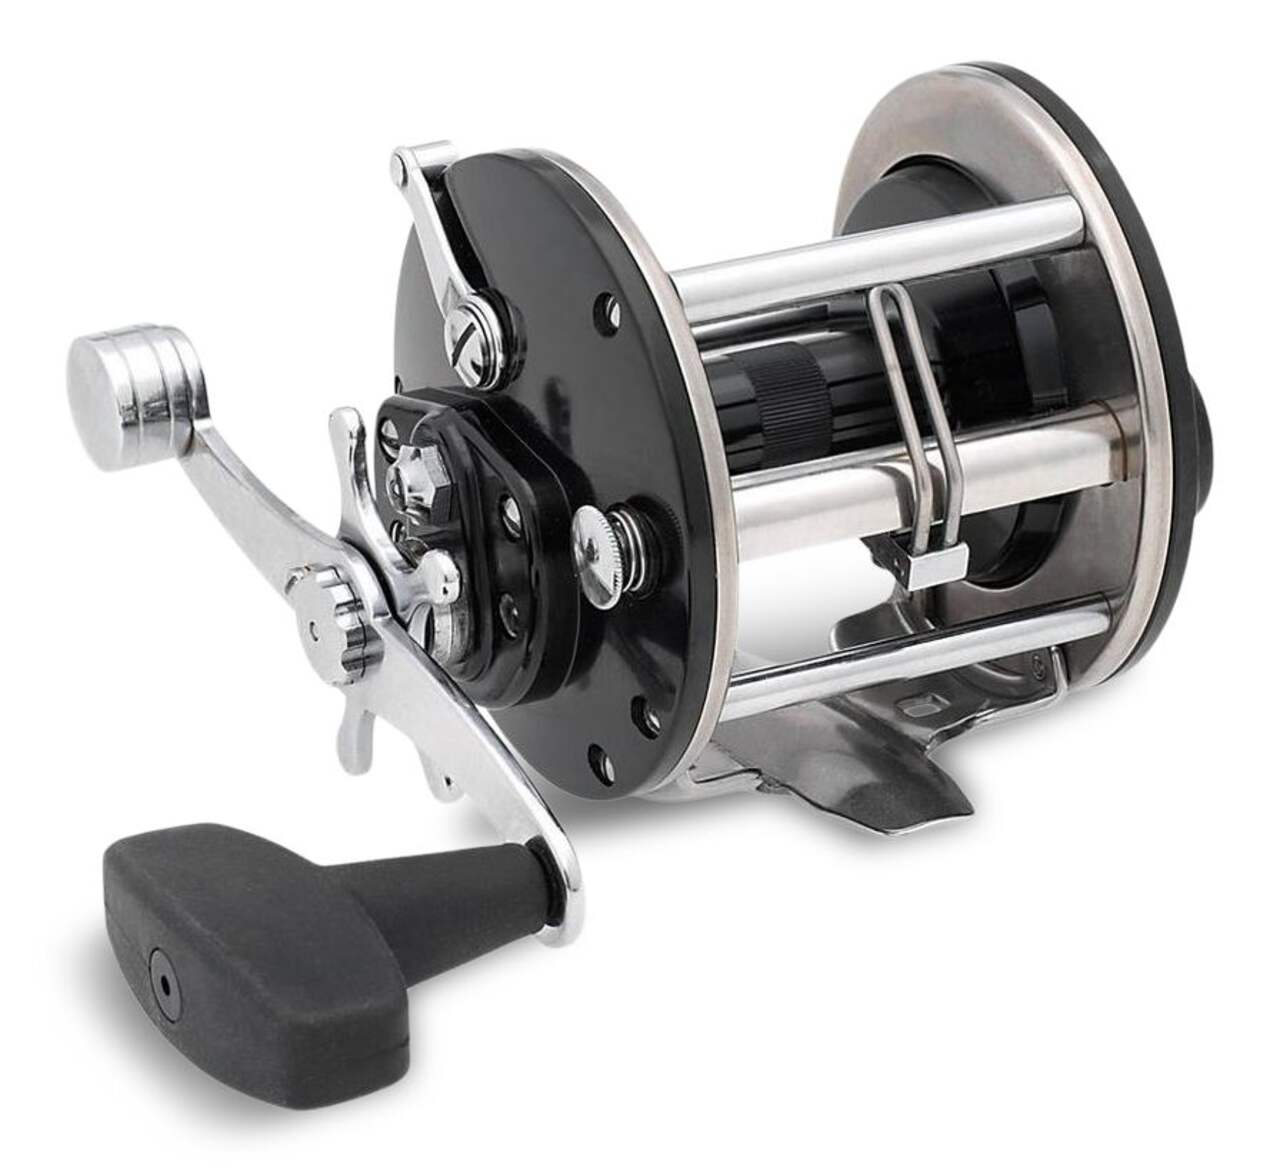 Shakespeare ATS30 Trolling Conventional Fresh Water Right Hand Fishing Reel